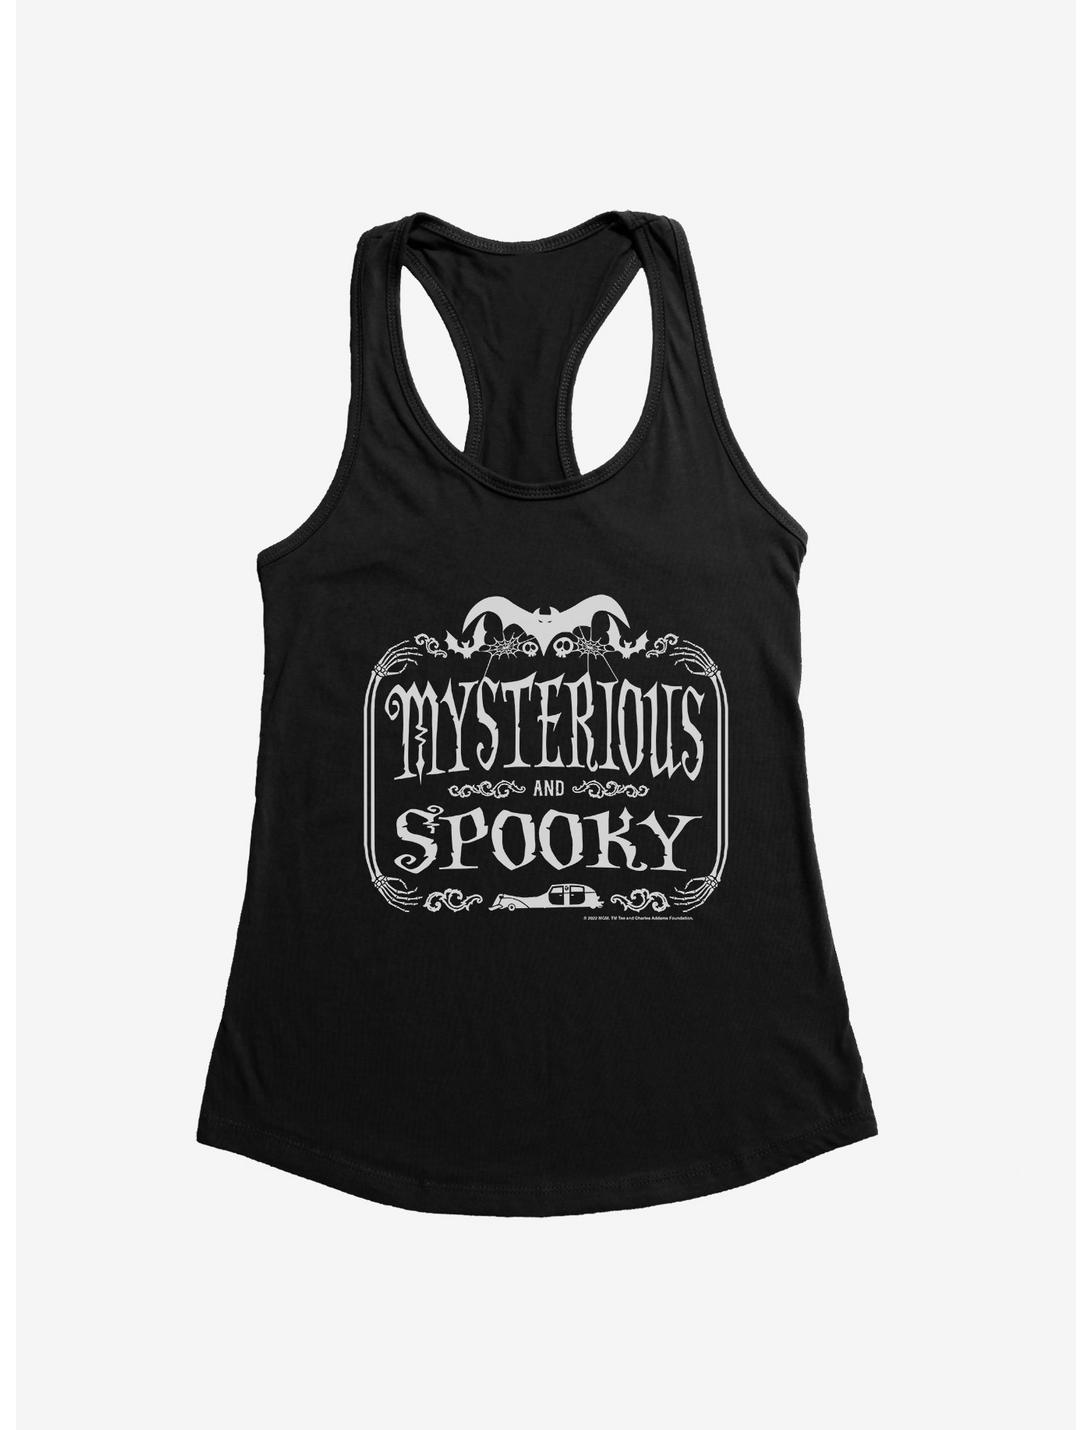 Addams Family Mysterious And Spooky Girls Tank, BLACK, hi-res